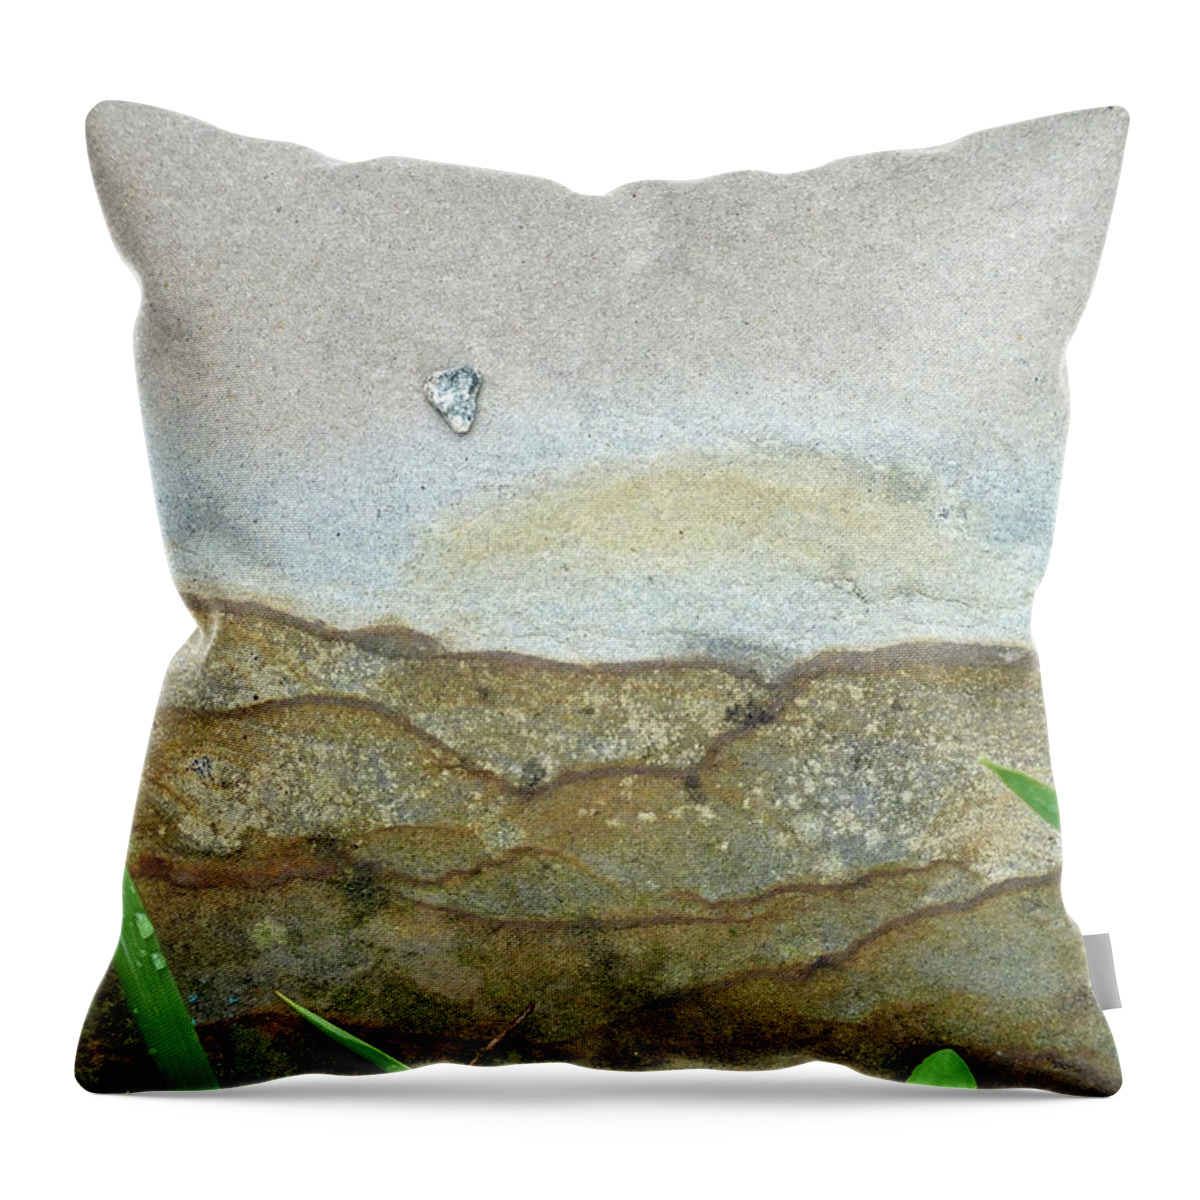 Duane Mccullough Throw Pillow featuring the photograph Rock Stain Abstract 5 by Duane McCullough